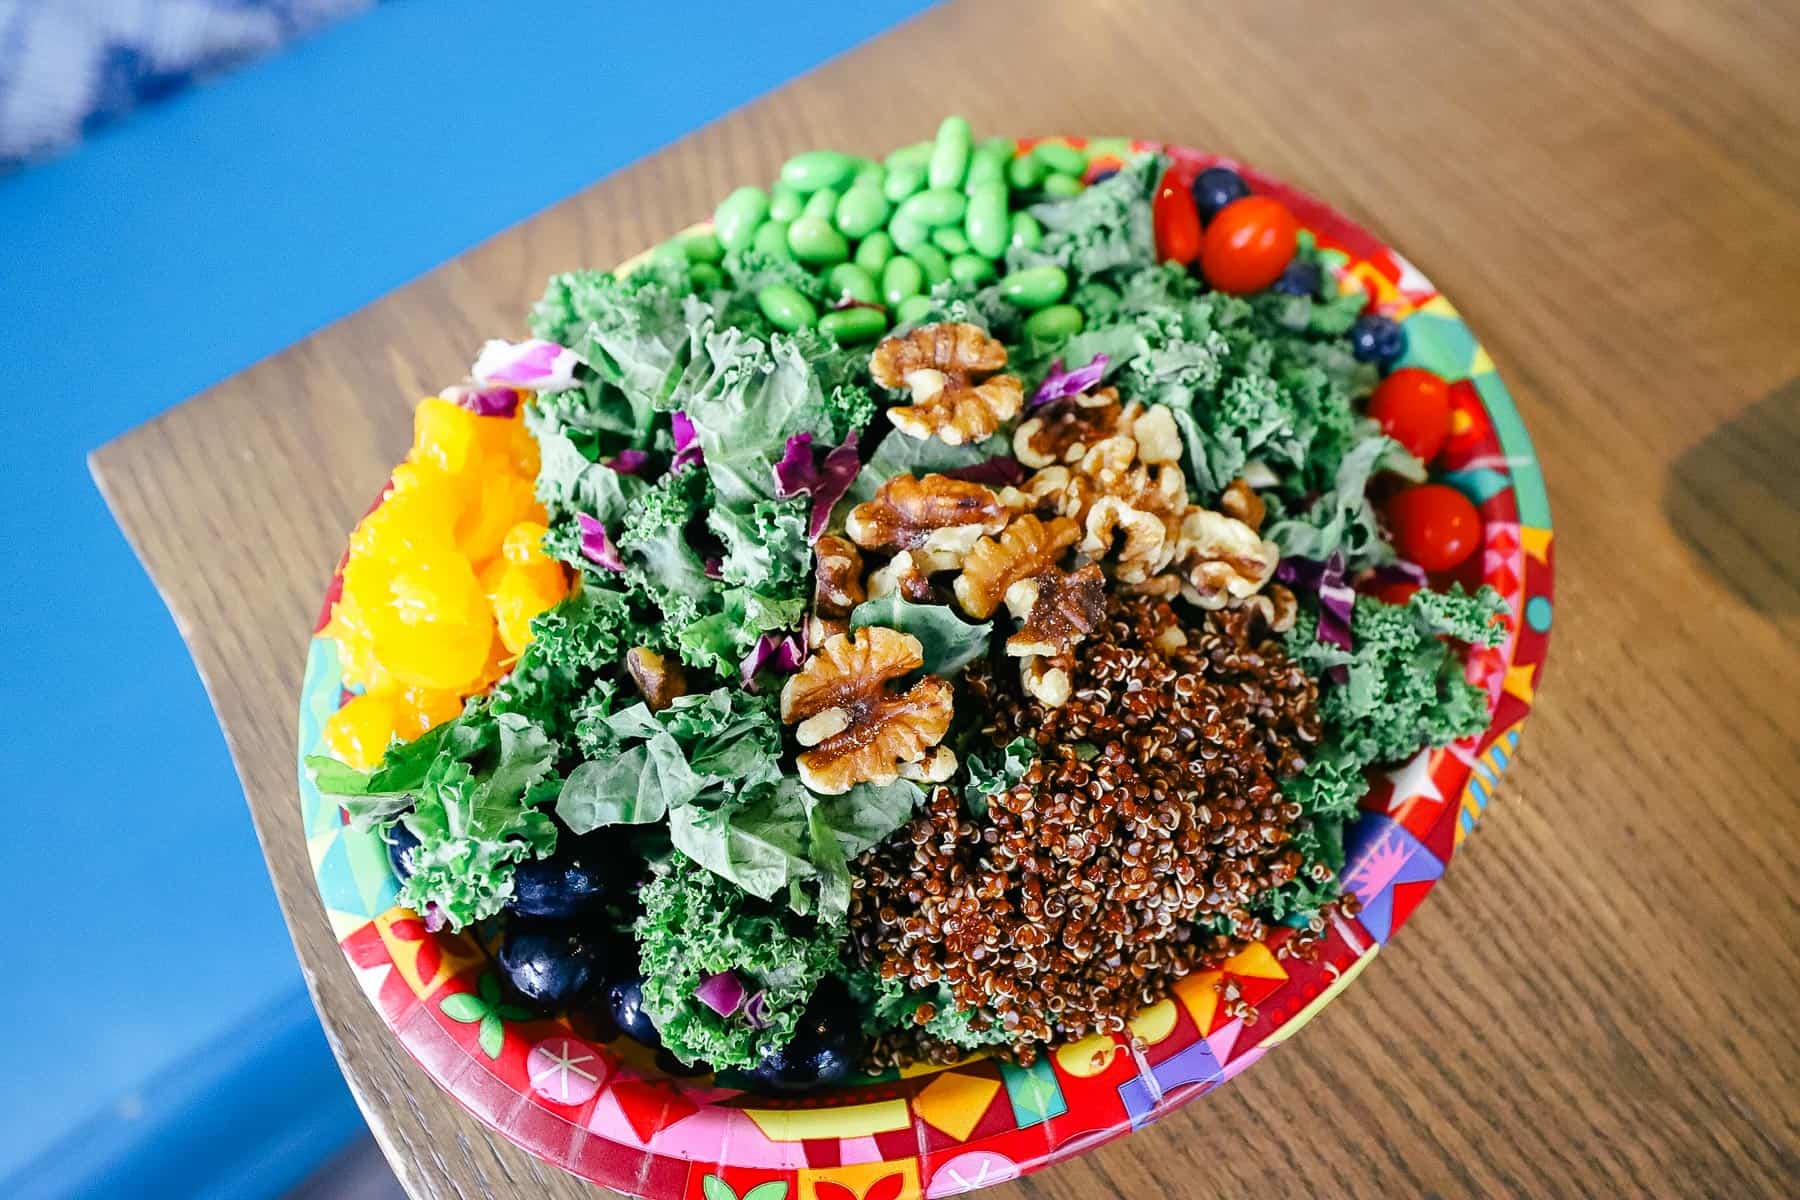 Superfoods Salad: Kale and Cabbage tossed with Quinoa and Edamame, Walnuts, Grapes, Blueberries, and Mandarin Oranges served with a side of Apple Cider Vinagarette
